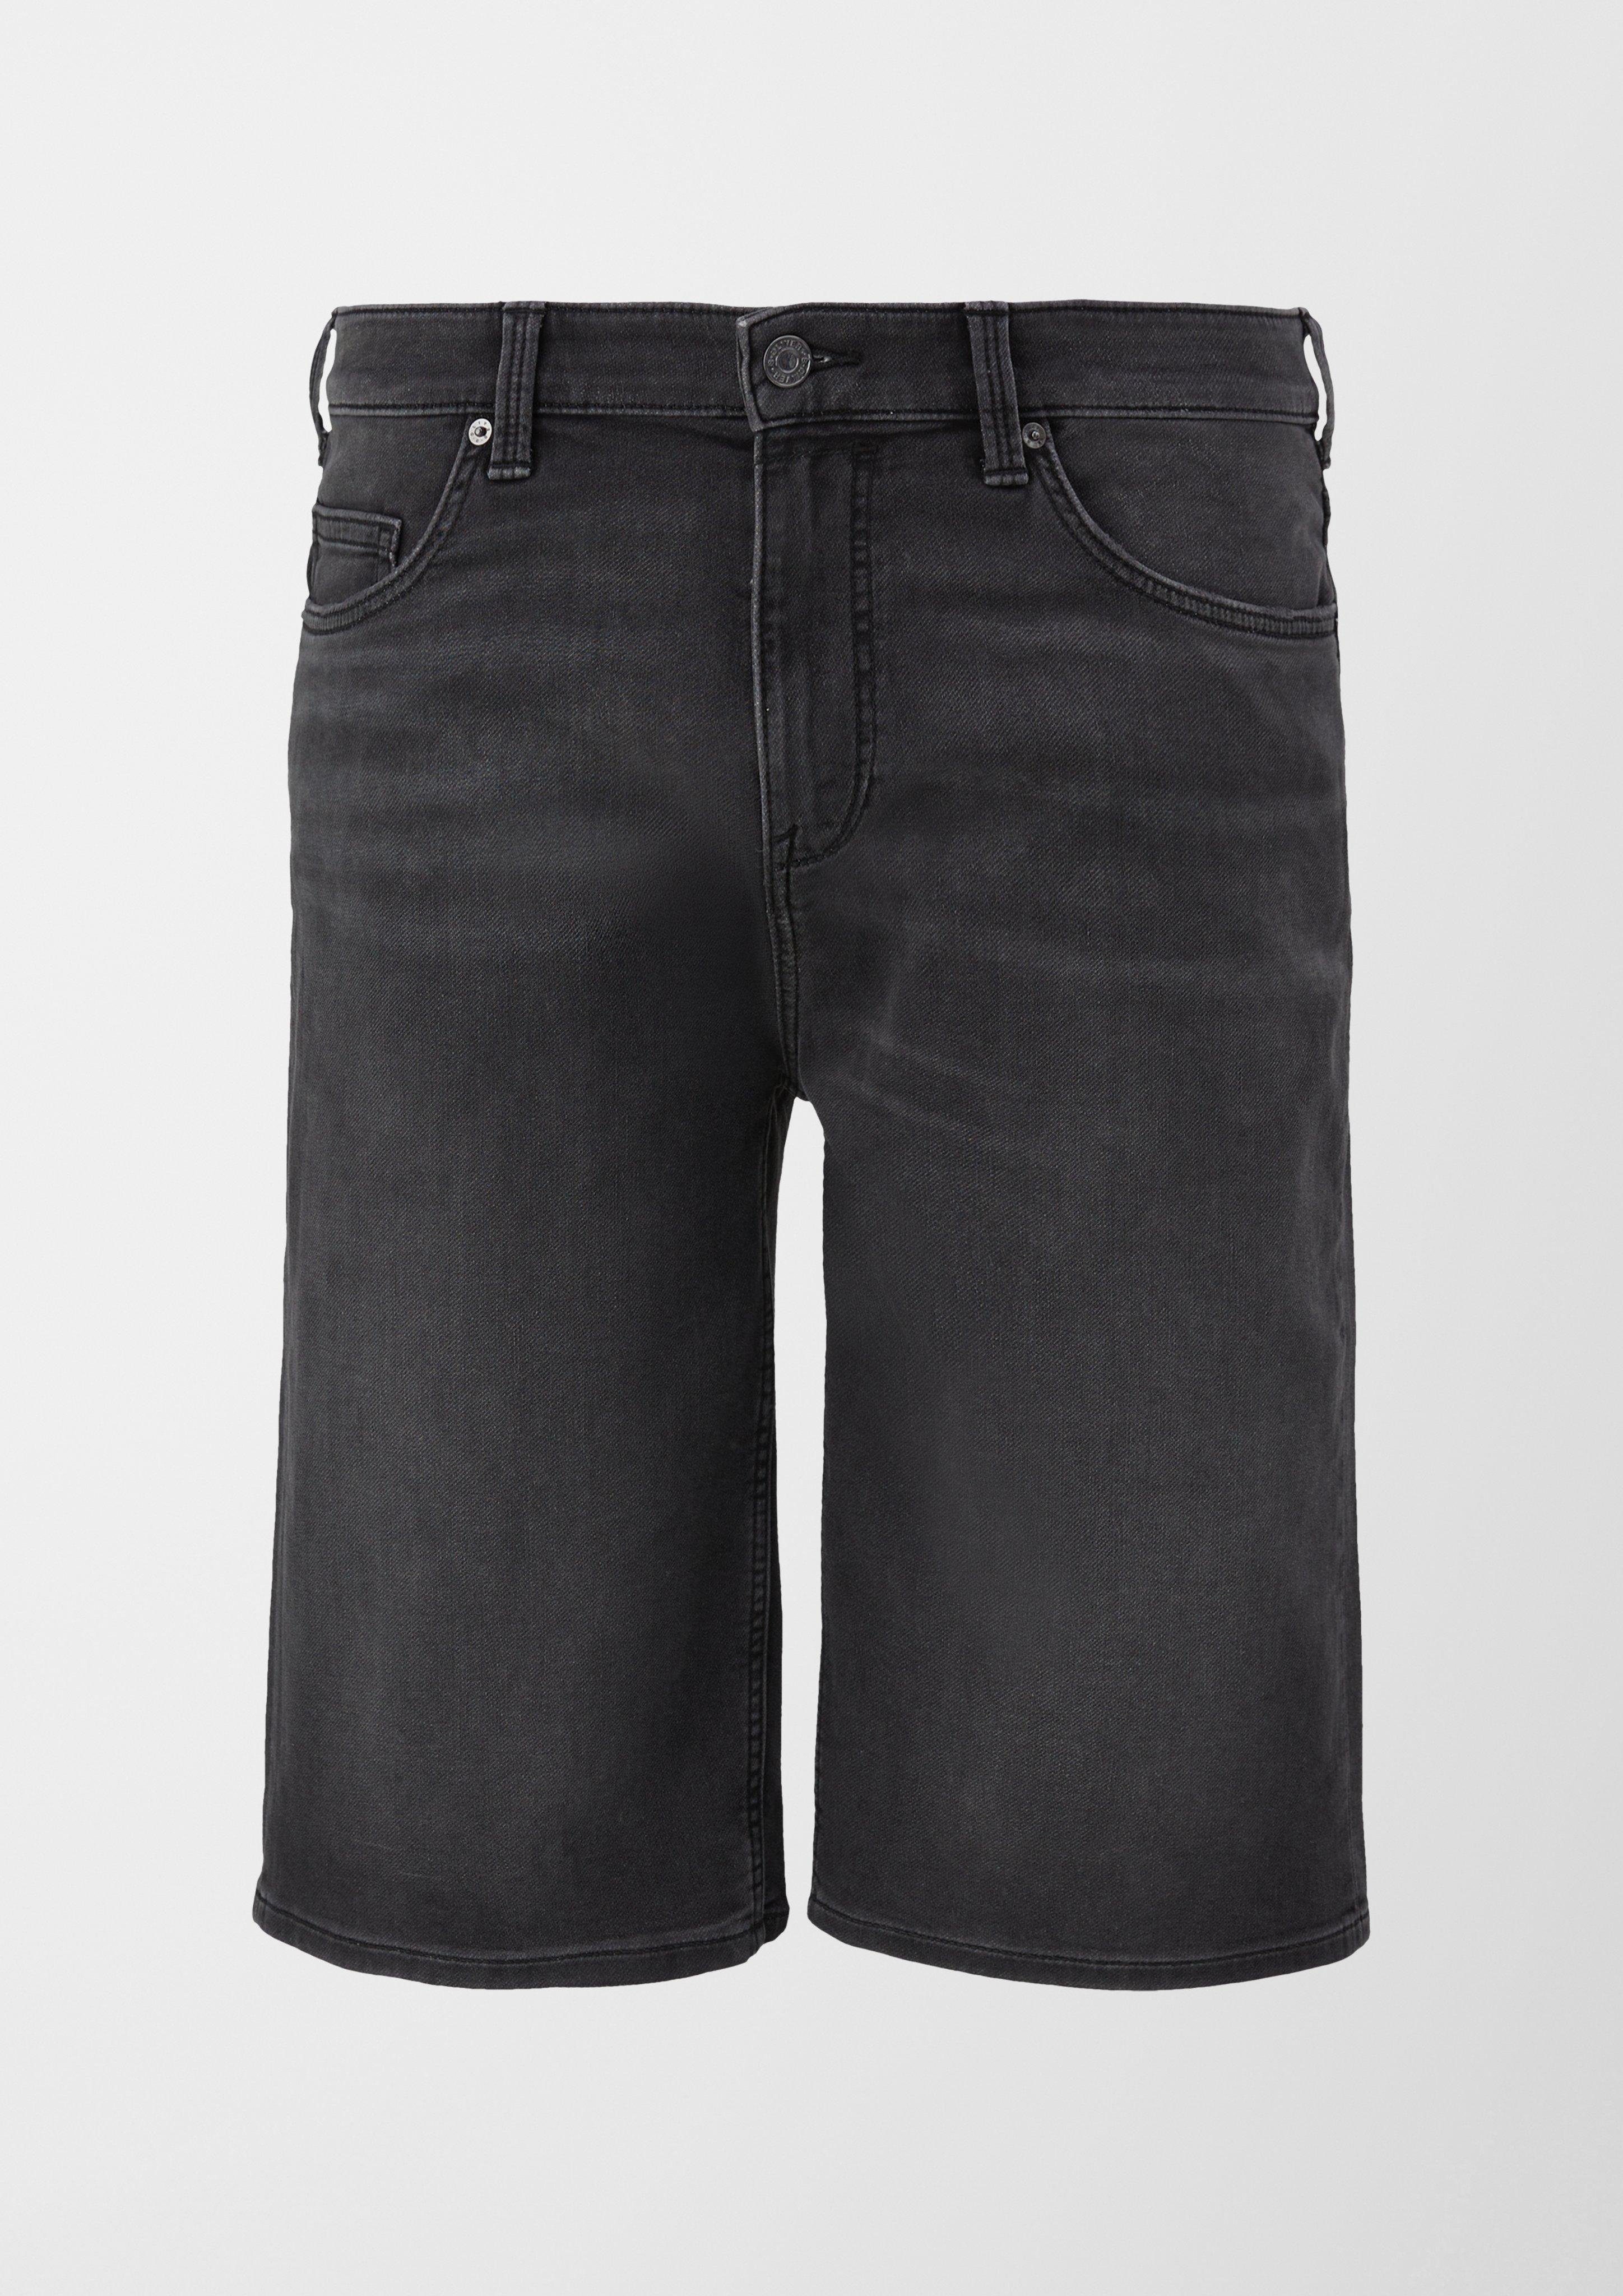 Holen Sie es sich online! s.Oliver Jeansshorts Jeans-Shorts Casby / Relaxed Leg Rise Fit Mid / Straight schiefergrau 